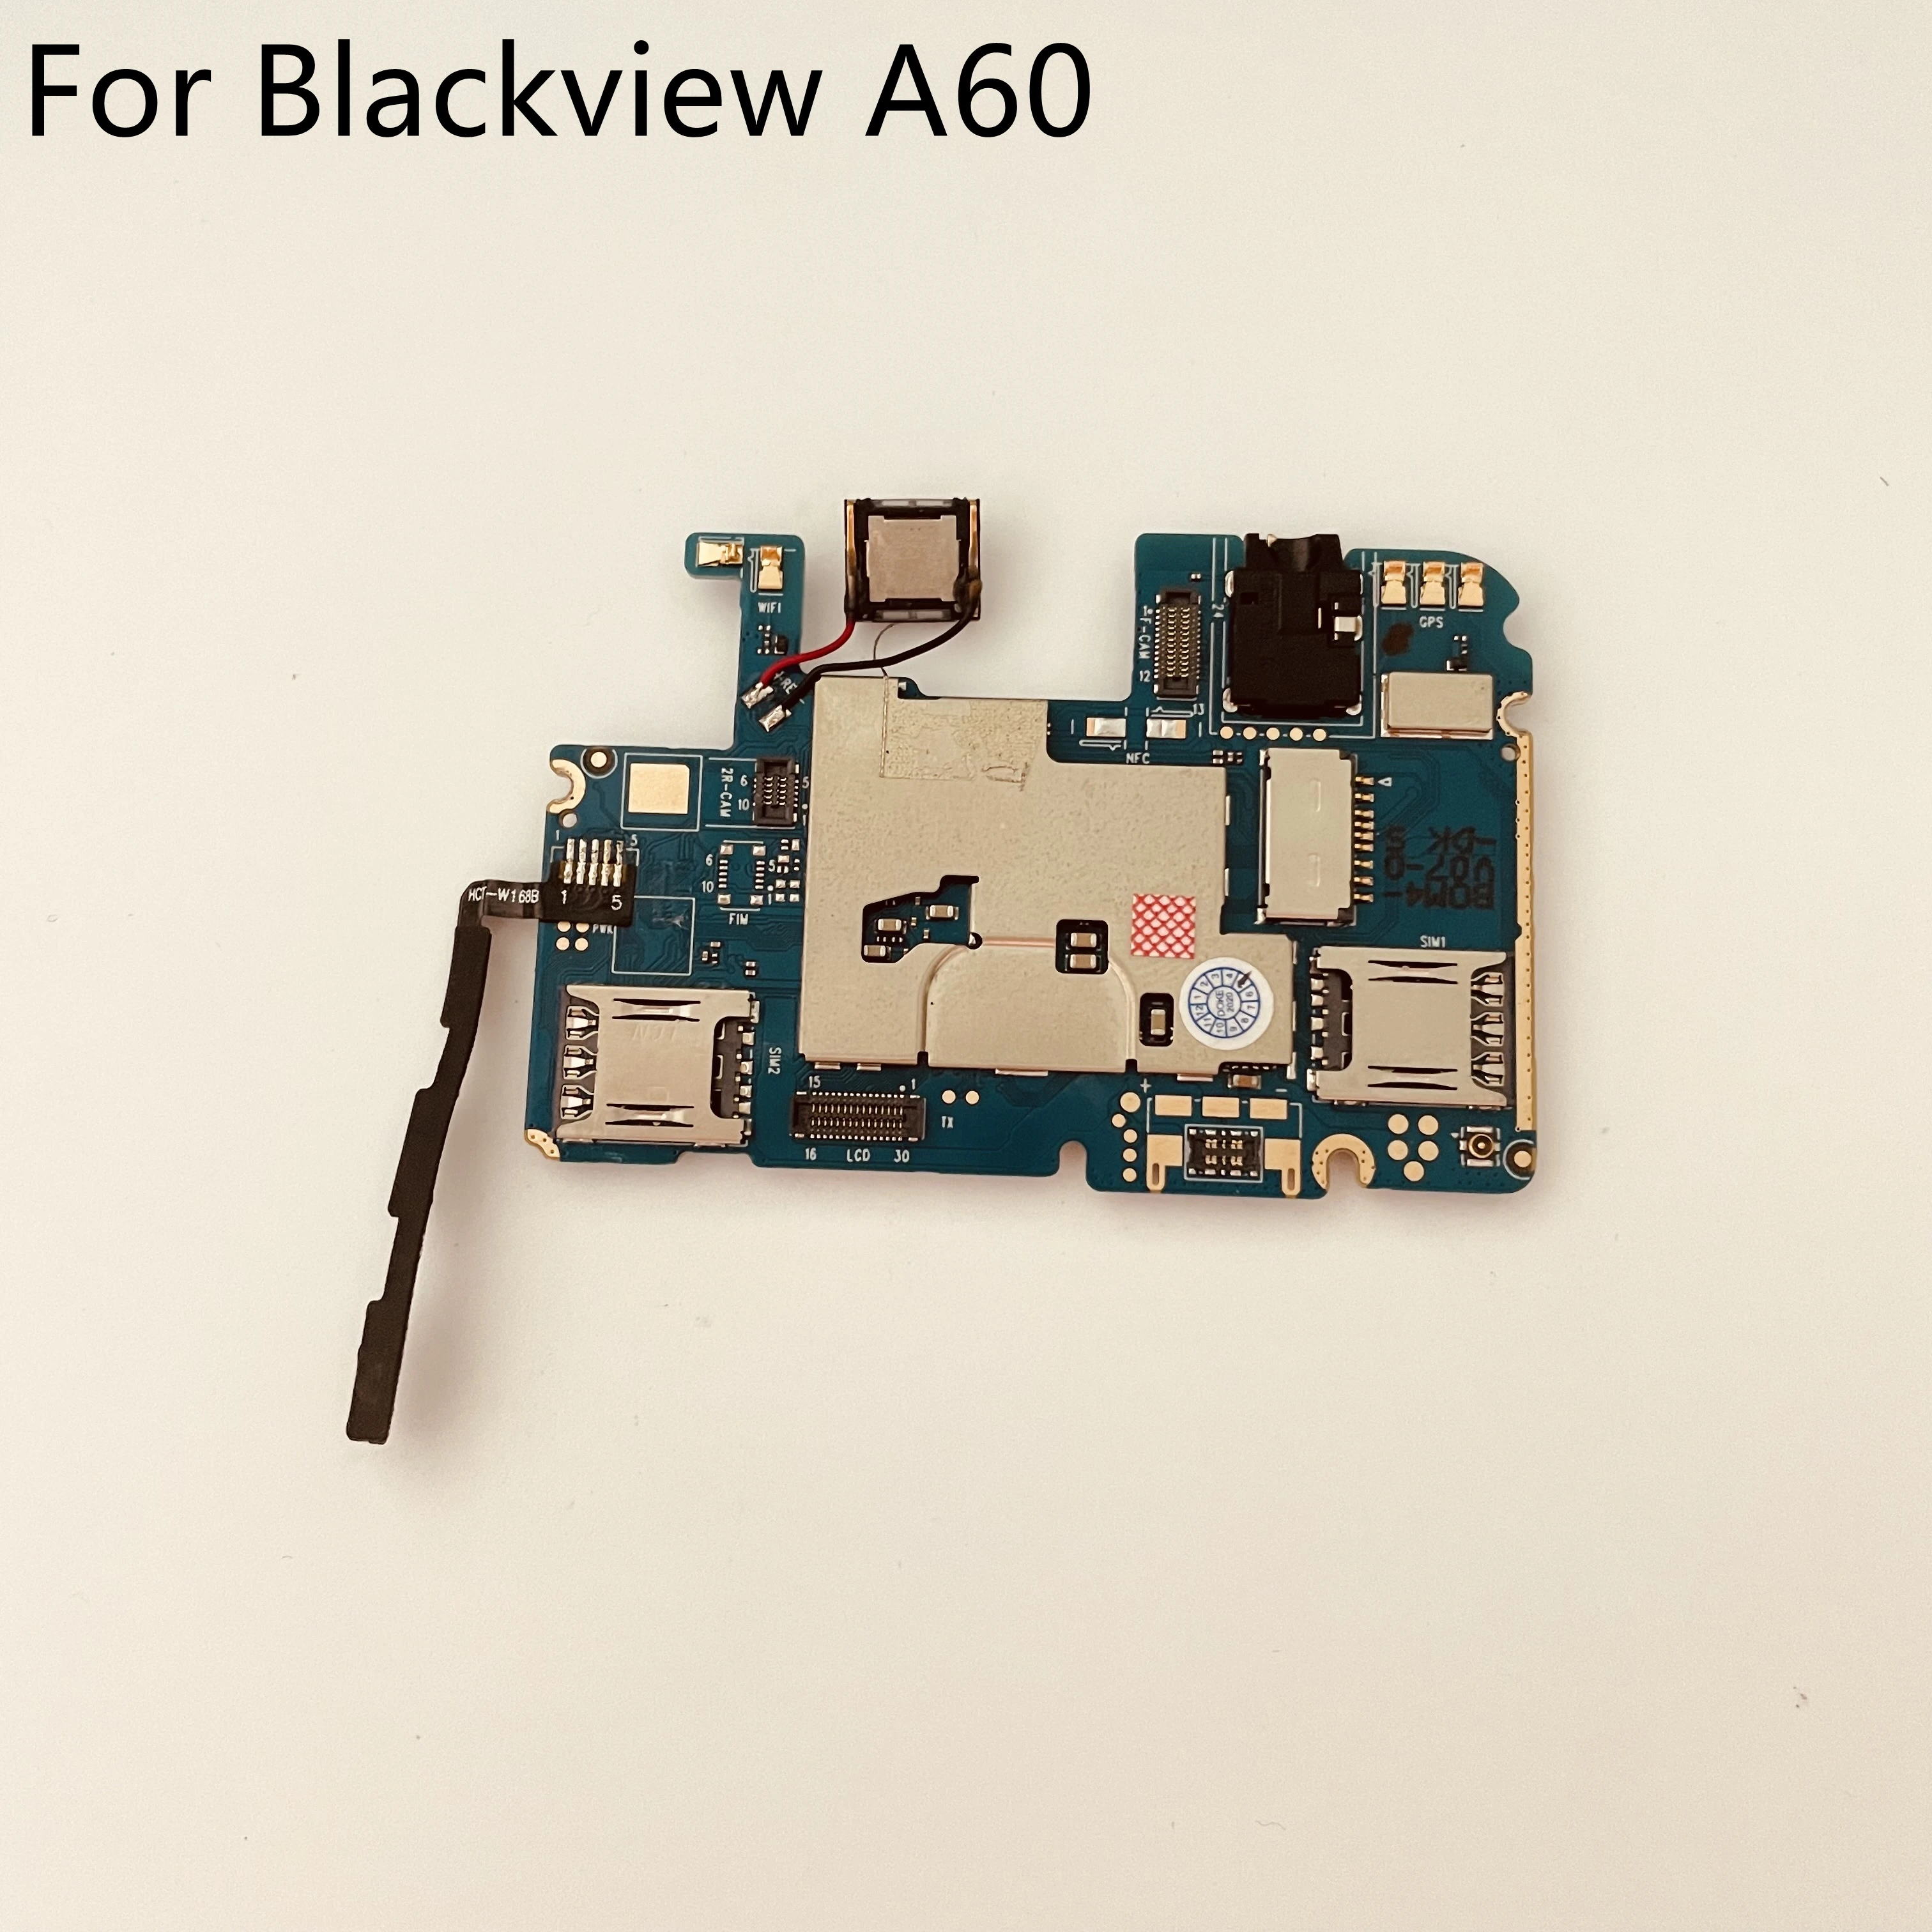 

Blackview A60 Used Mainboard 1G RAM+16G ROM Motherboard For Blackview A60 MT6580 Quad core 6.1" 1280*600 Free Shipping